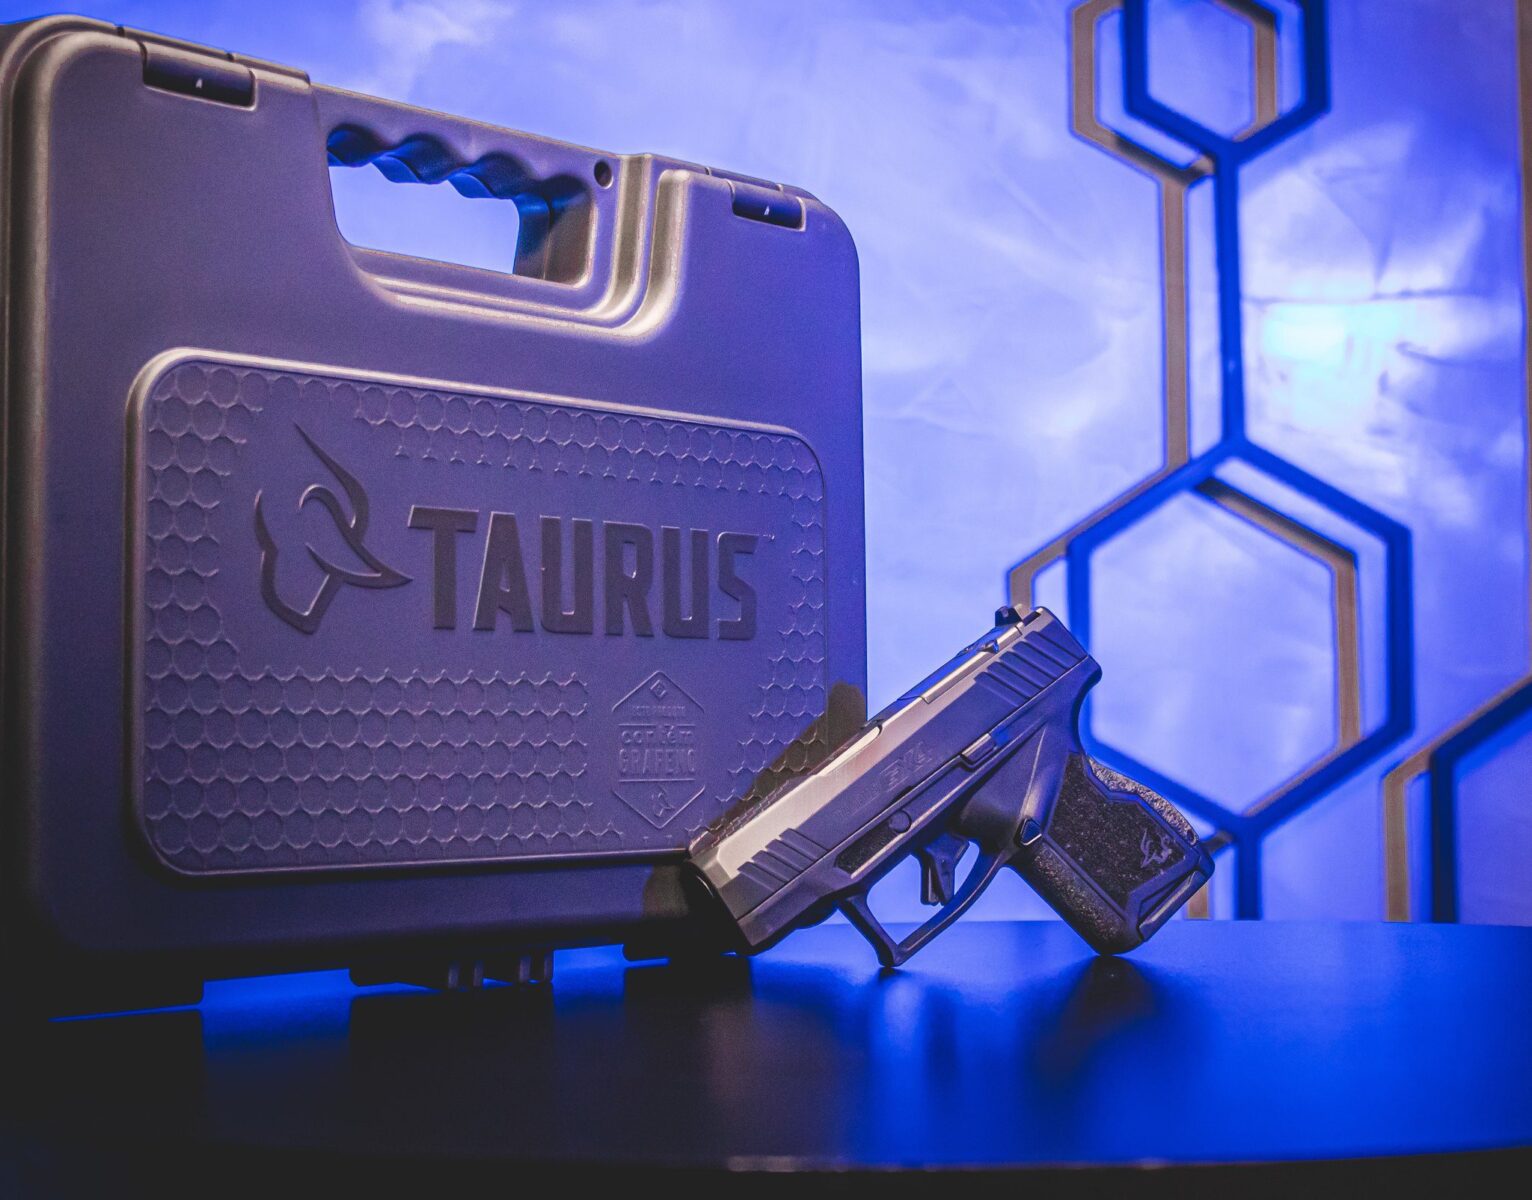 Tactical and weapons market leaders bring new 2022/23 trends to W2C